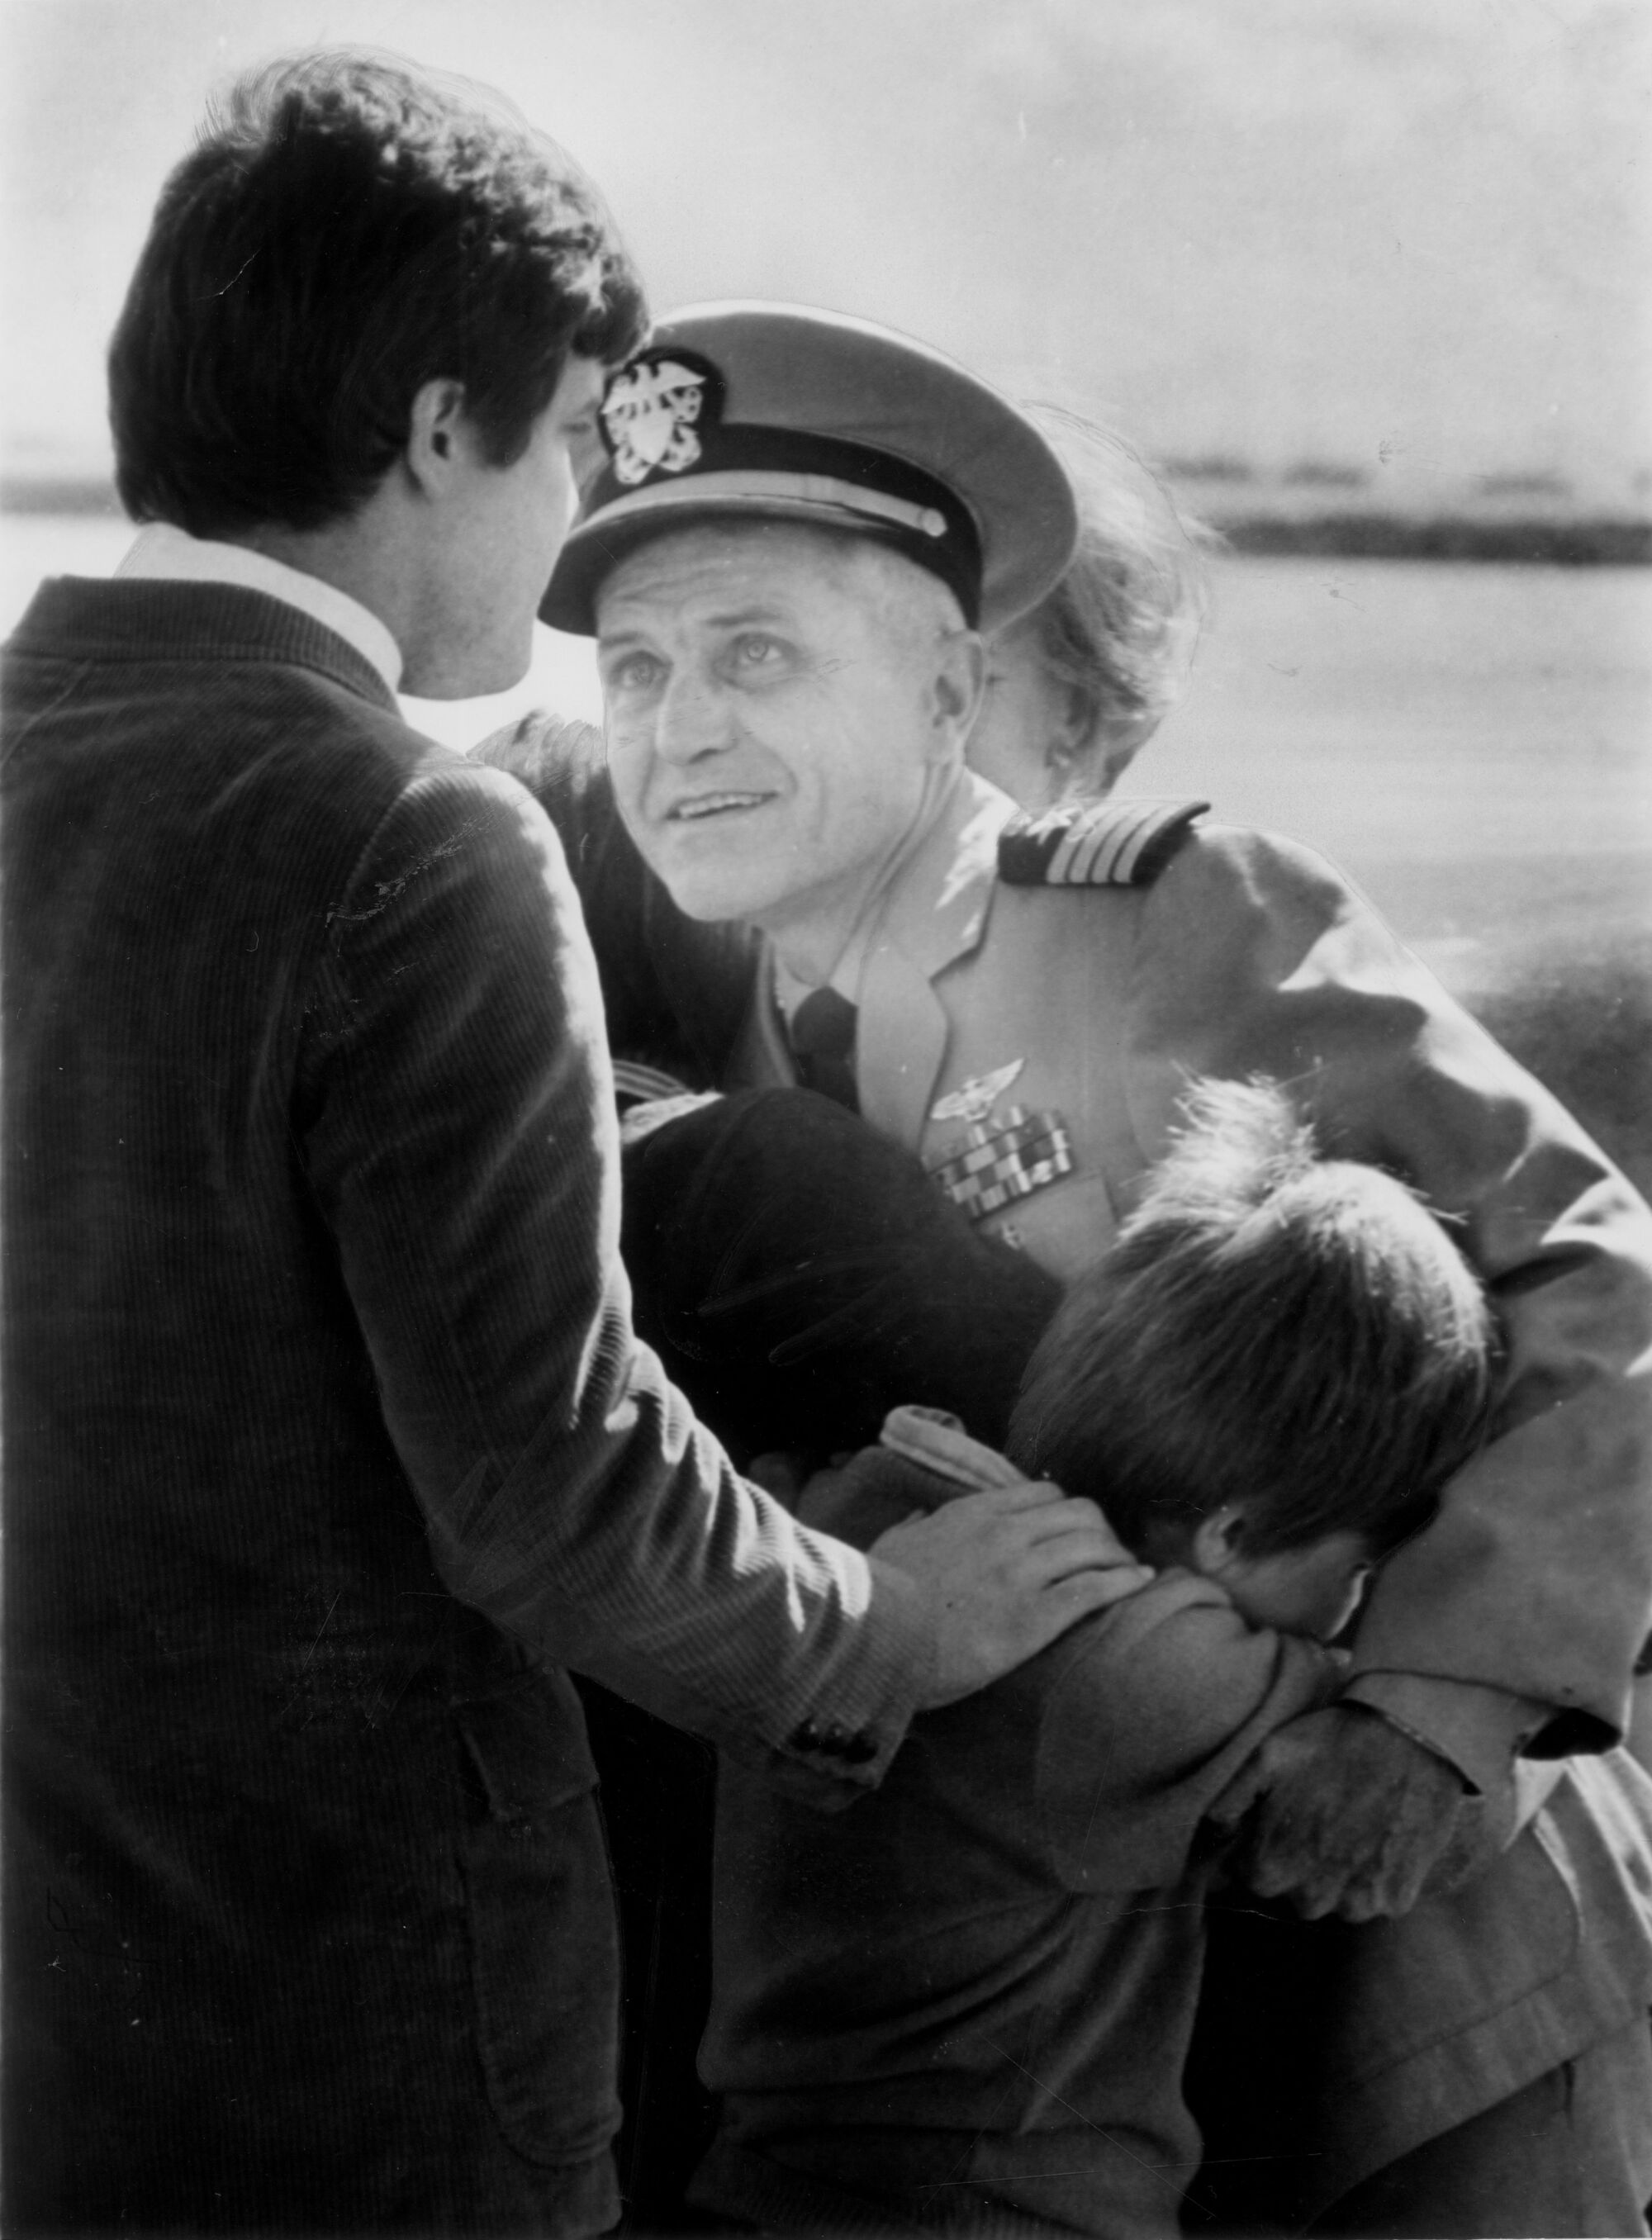 02/15/1973: Capt. James B. Stockdale greets his family after arrival at Miramar Naval Air Station.